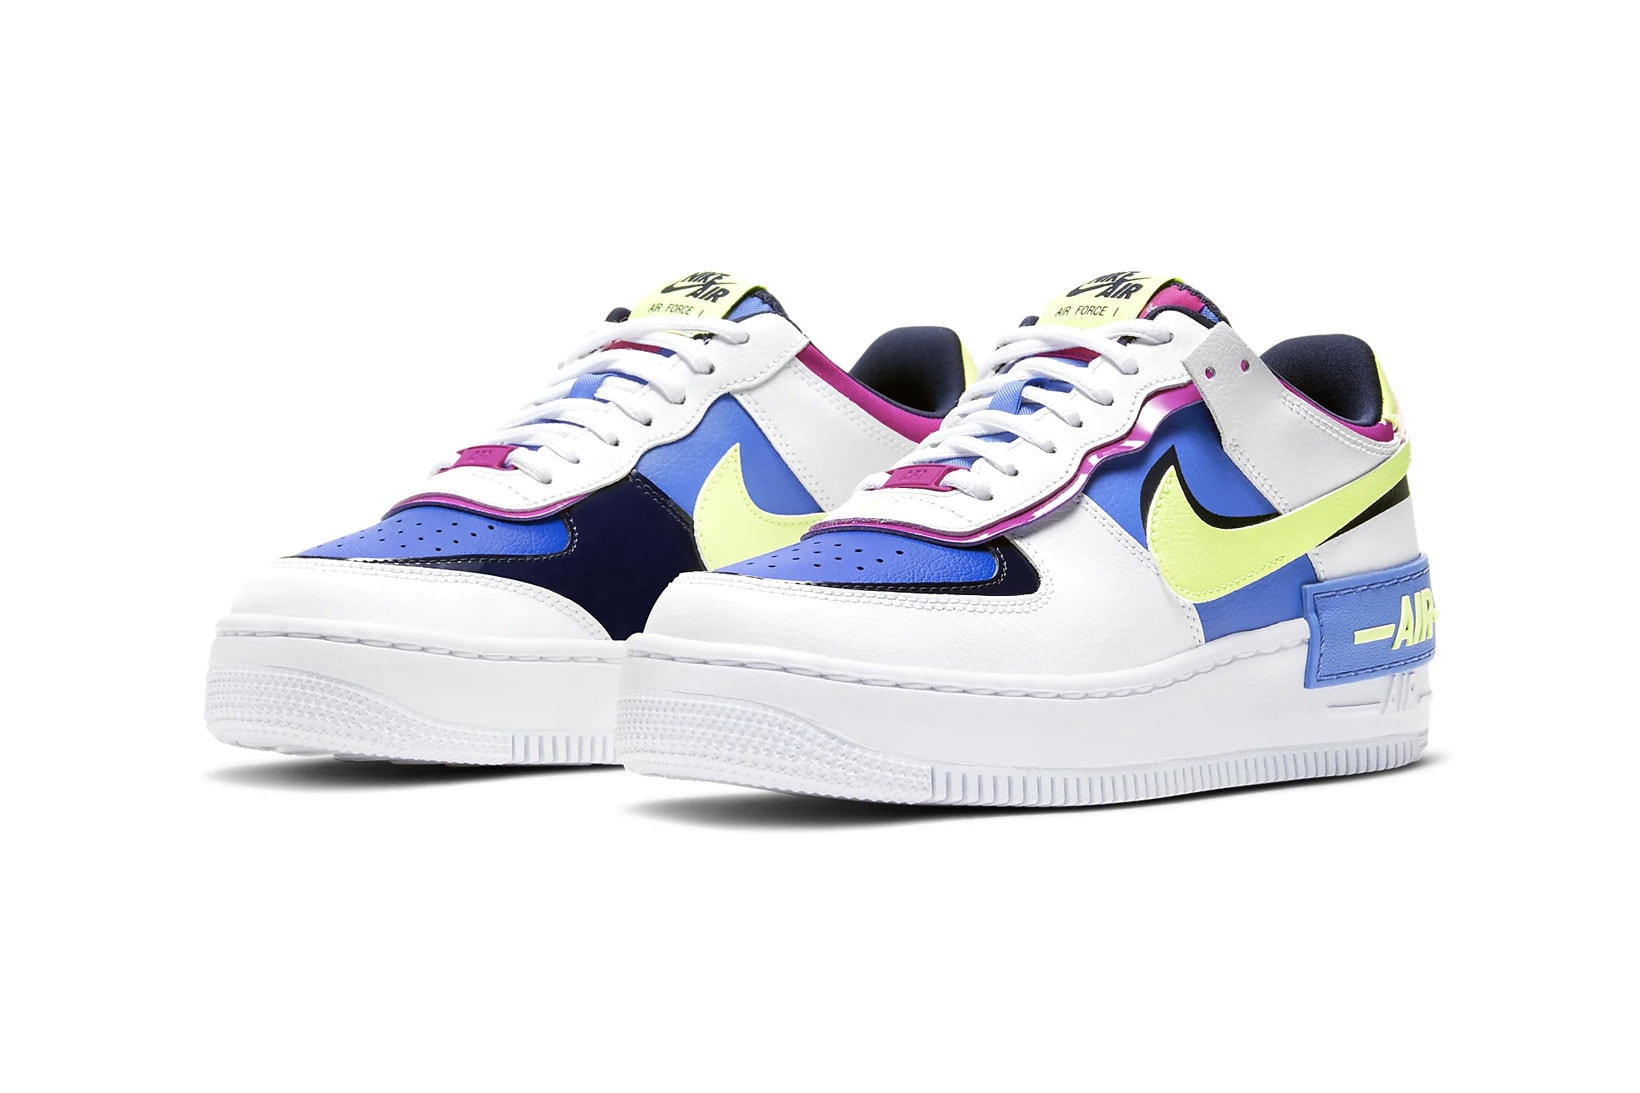 nike air force 1 af1 shadow pink blue sapphire fire white womens sneakers release price